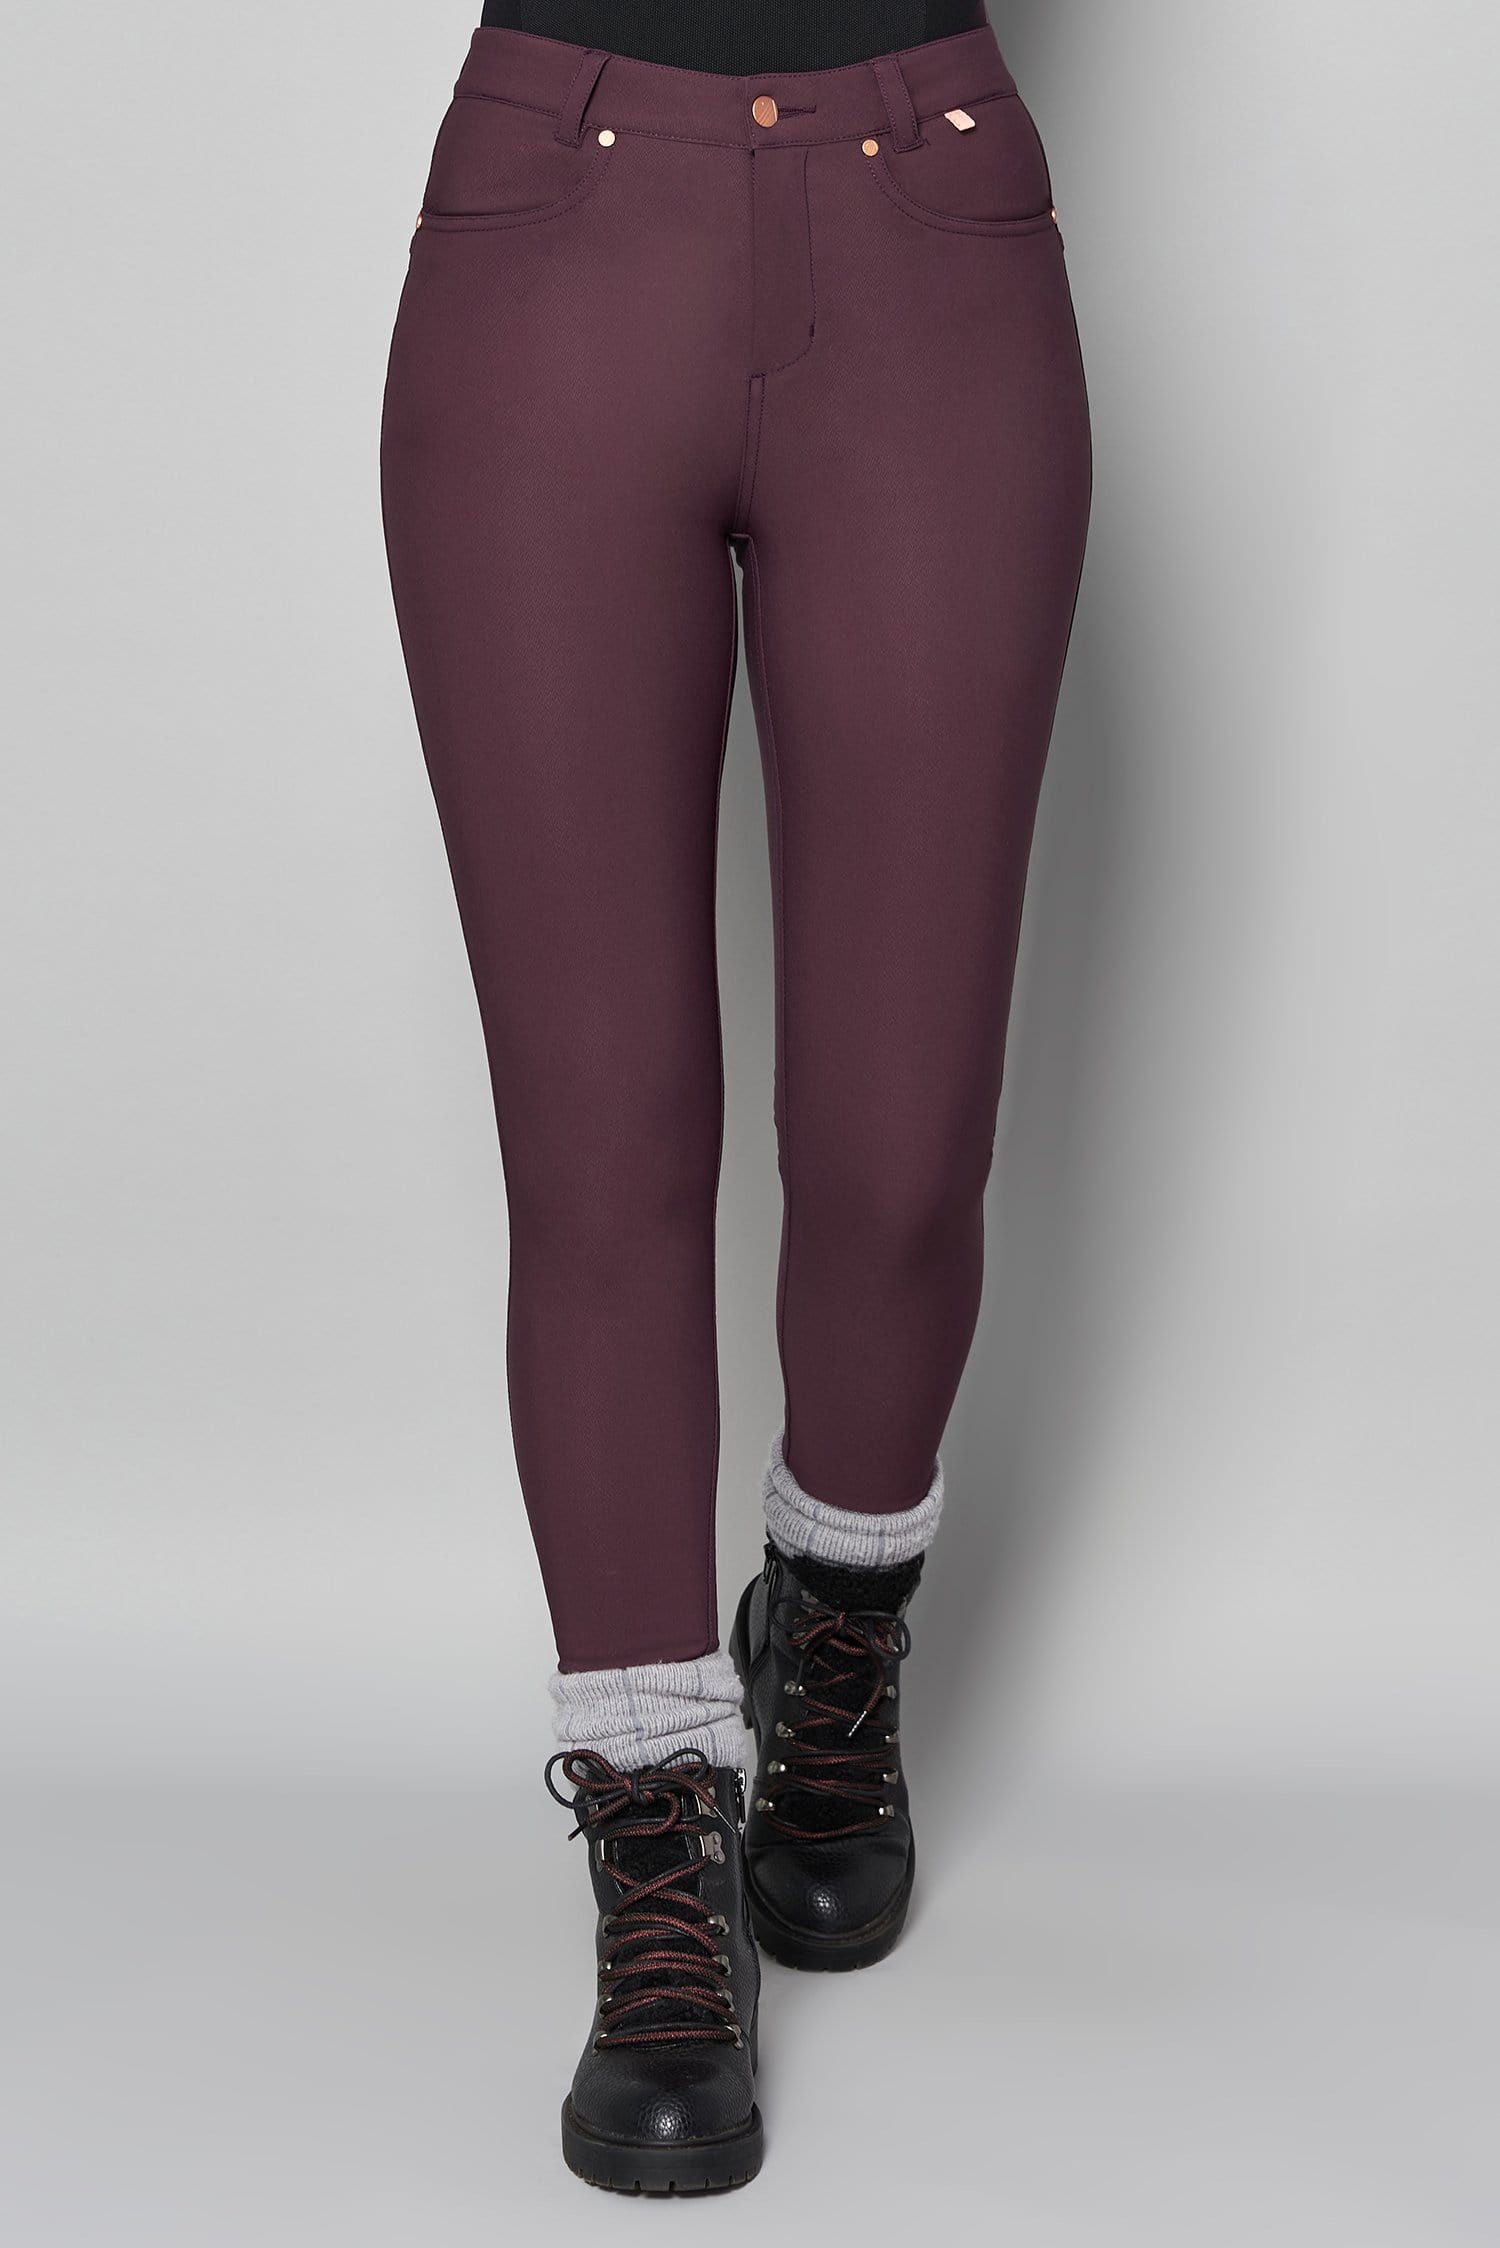 Thermal Skinny Outdoor Trousers - Aubergine - 28r / Uk10 - Womens - Acai Outdoorwear